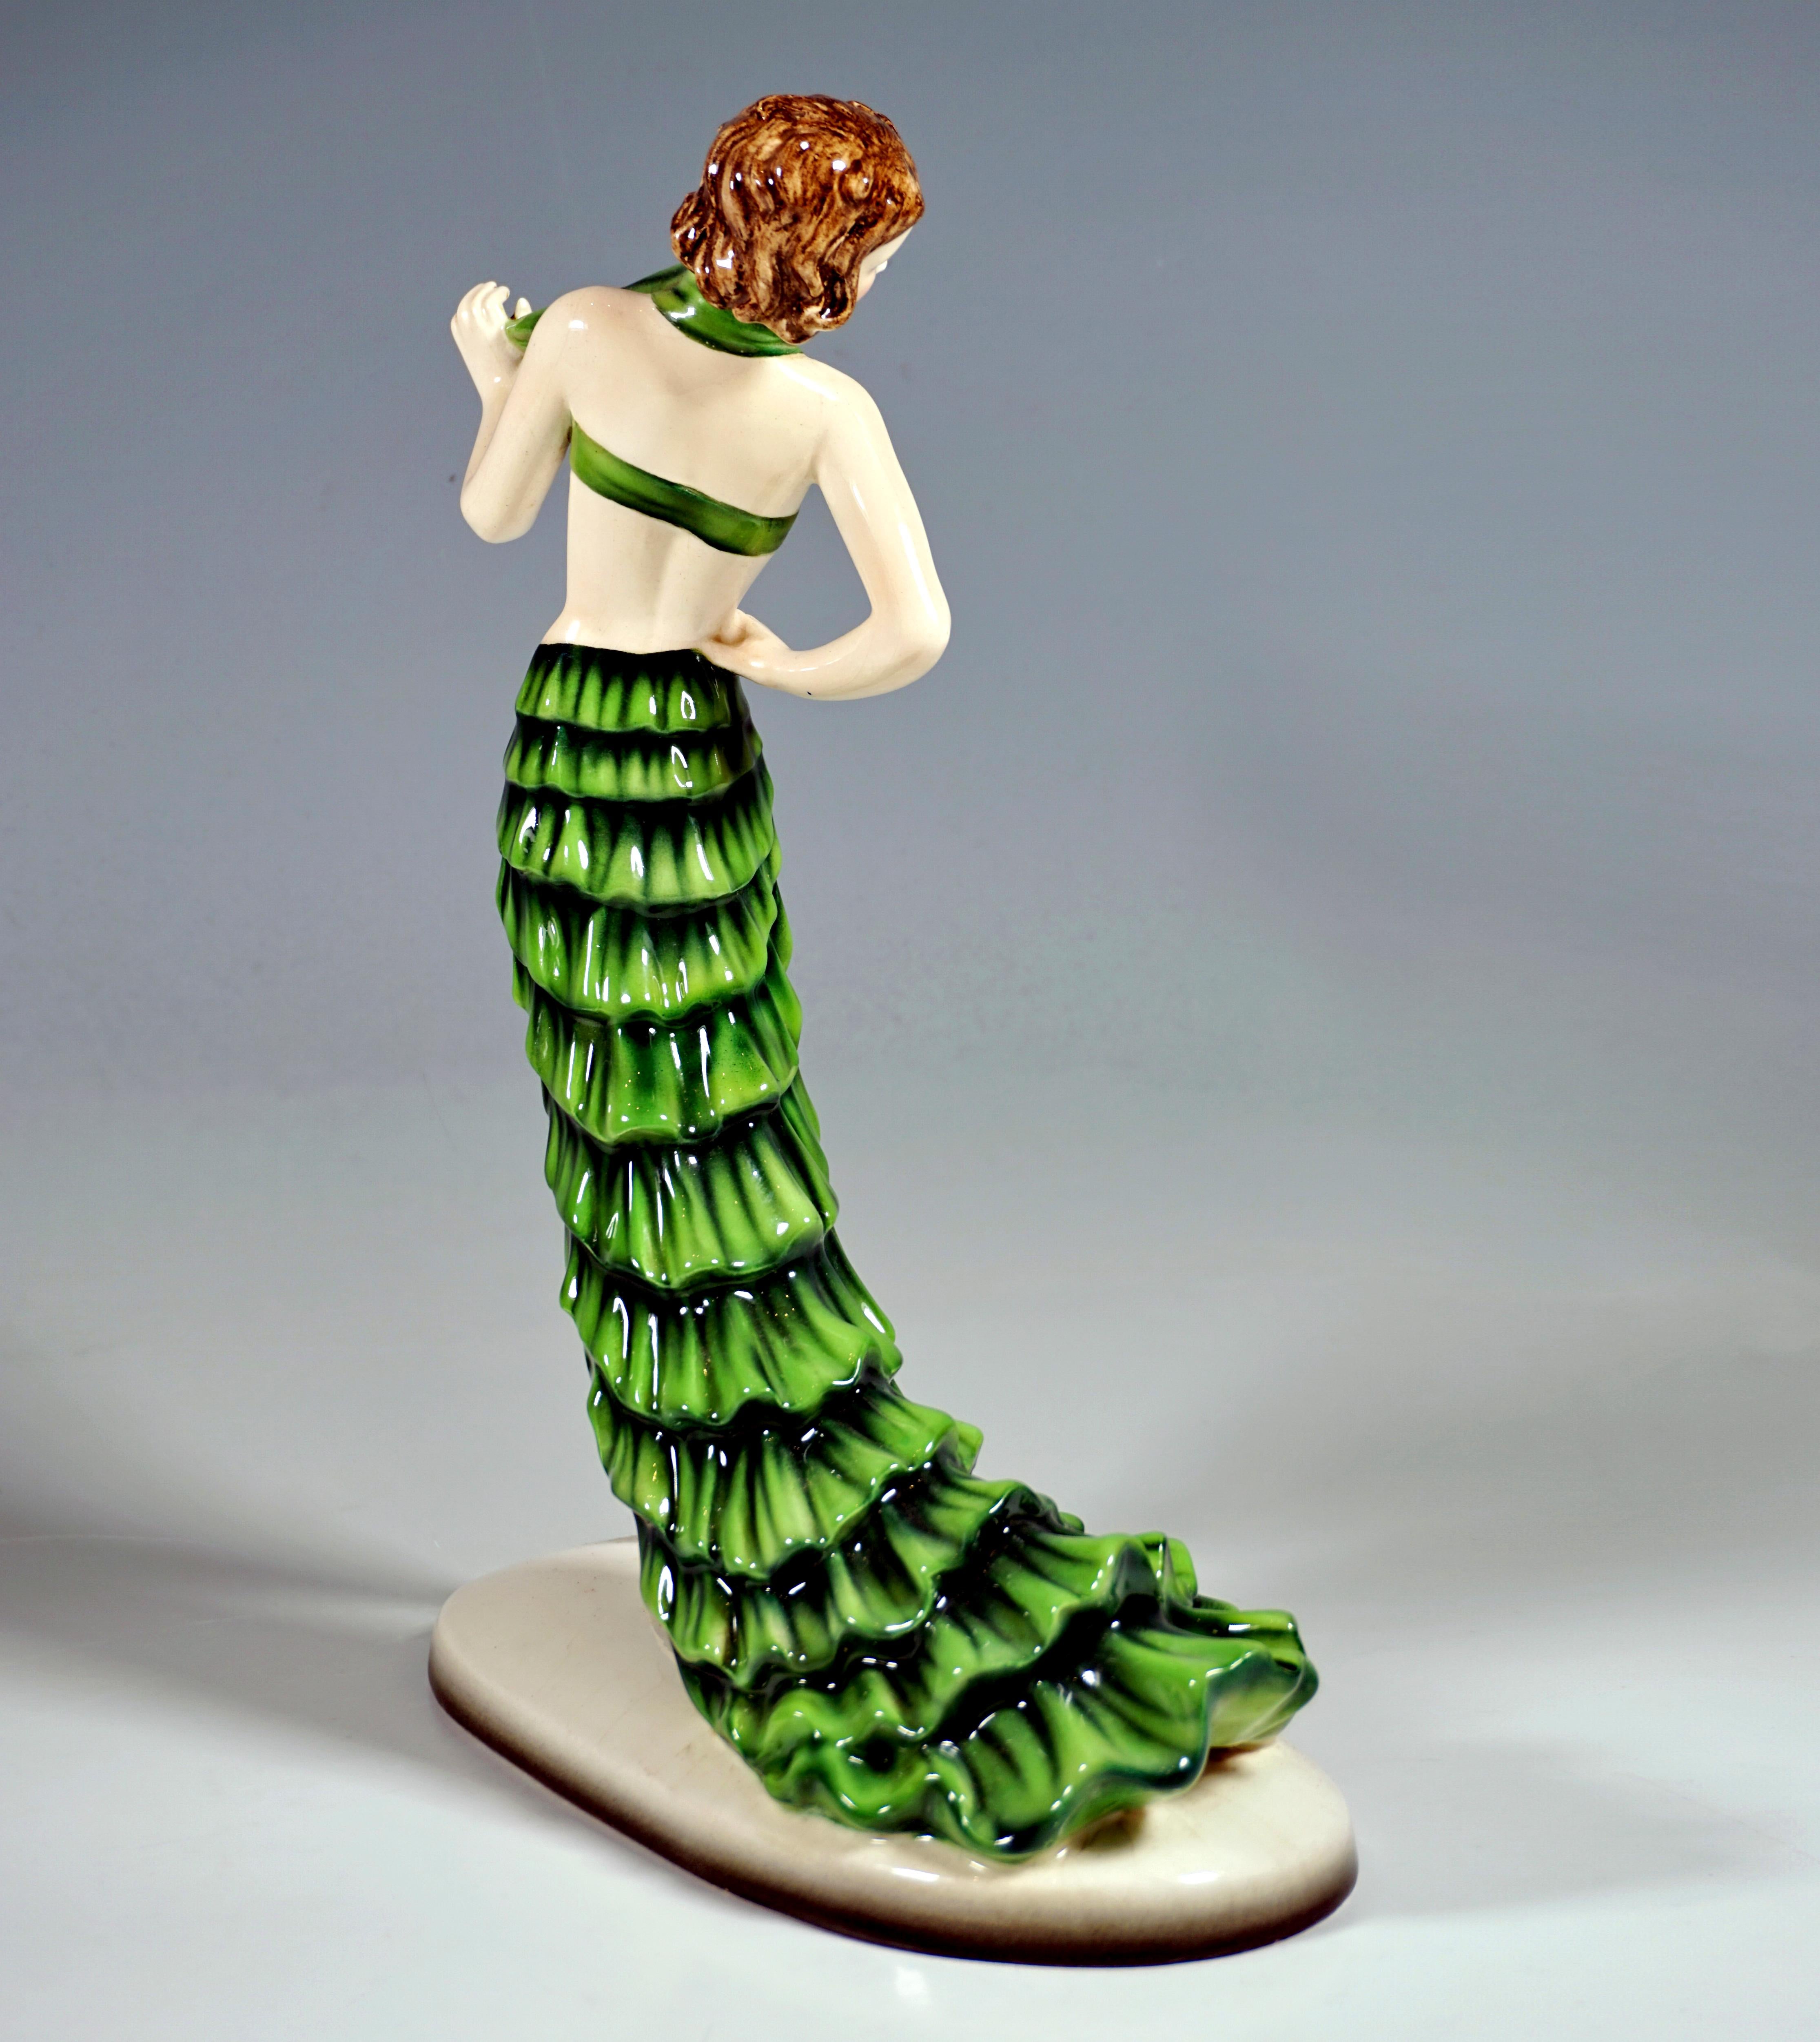 Rare Goldscheider Art Déco Ceramic Figurine of the 1930s:
Posing dancer with short hair in a green costume: tight bustier and a short, high-slit flounced skirt with a long train and matching high-heeled shoes, the right leg placed in front, the